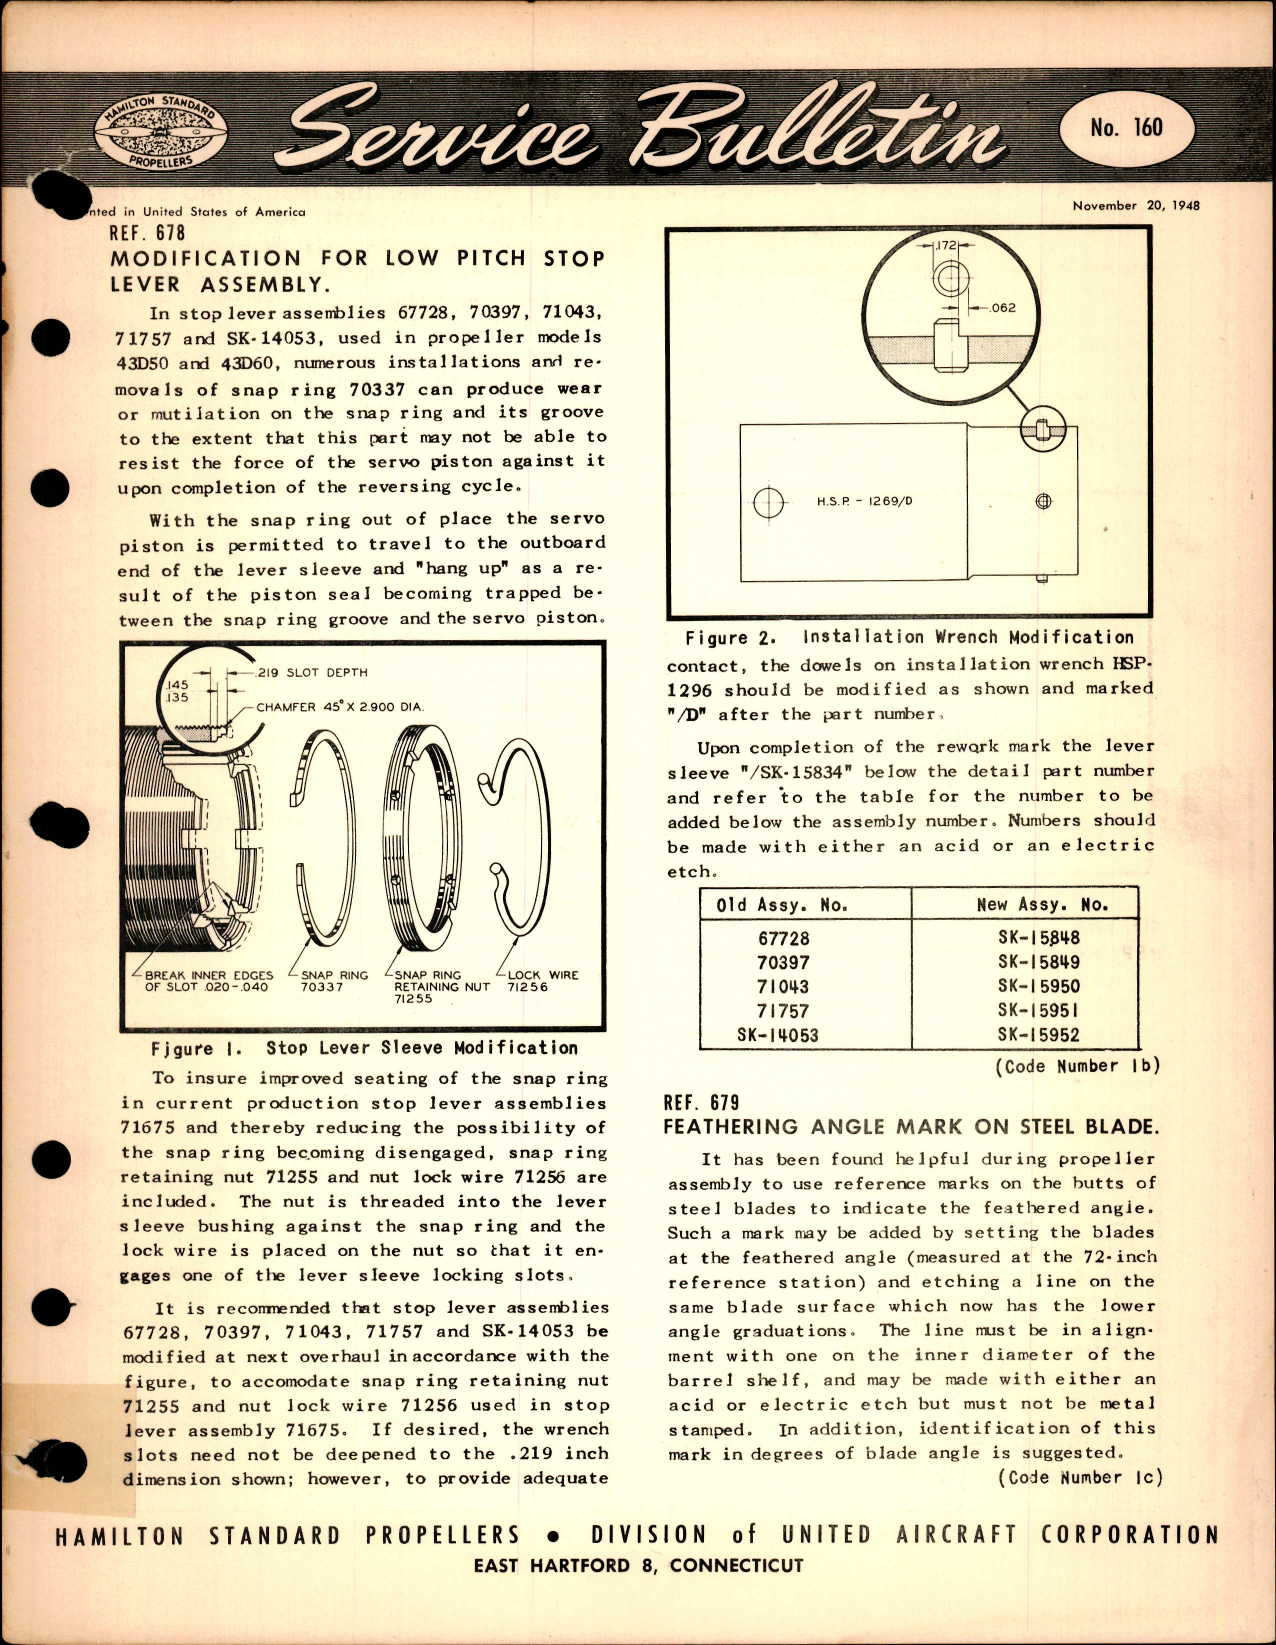 Sample page 1 from AirCorps Library document: Modification for Low Pitch Stop Lever Assembly, Ref 678